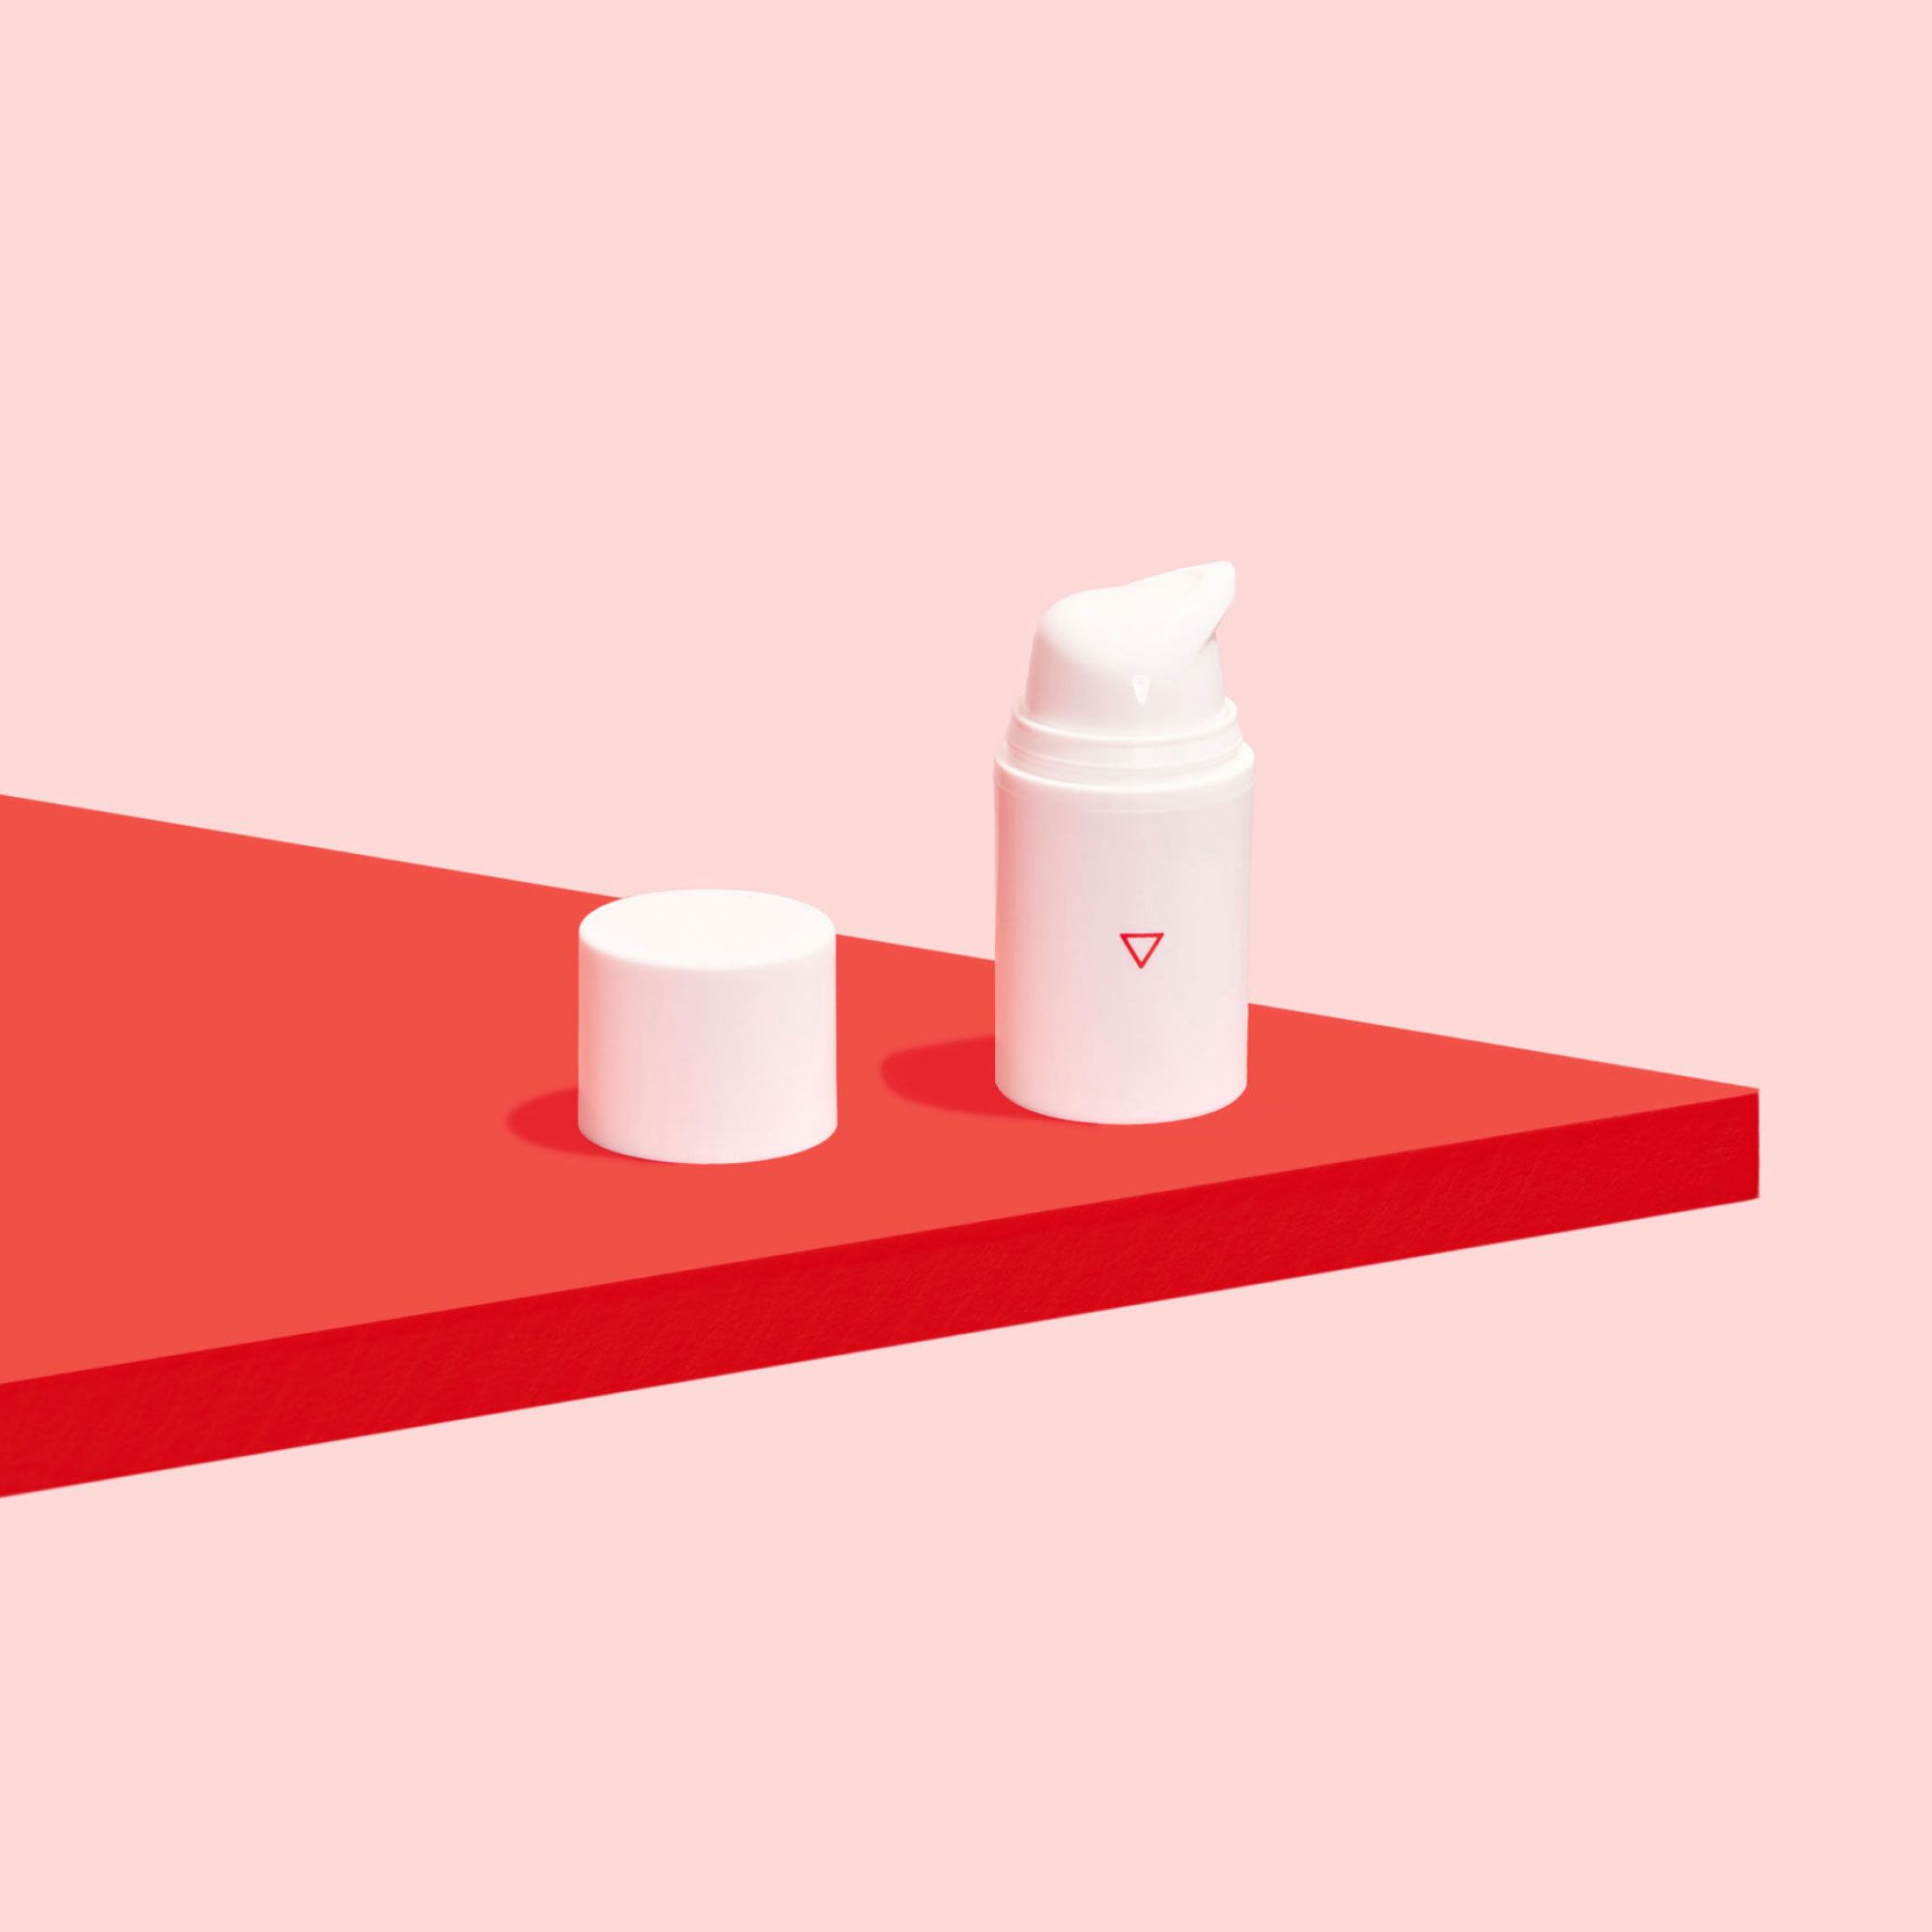 A bottle of Wisp Hydrocortisone Cream on a red surface with a pink background